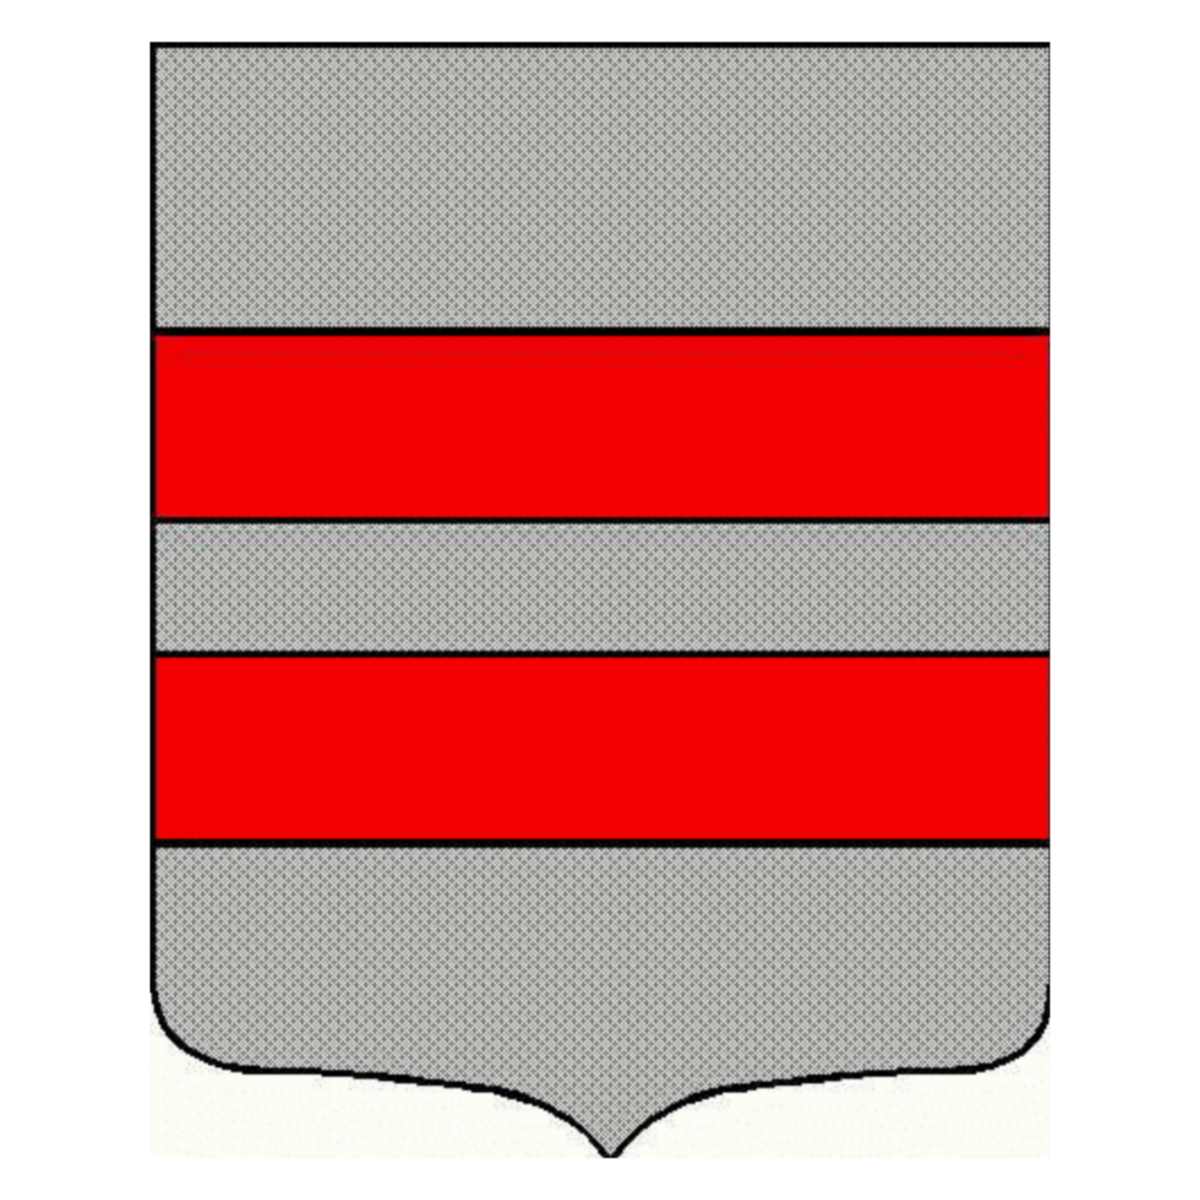 Coat of arms of family Ecker